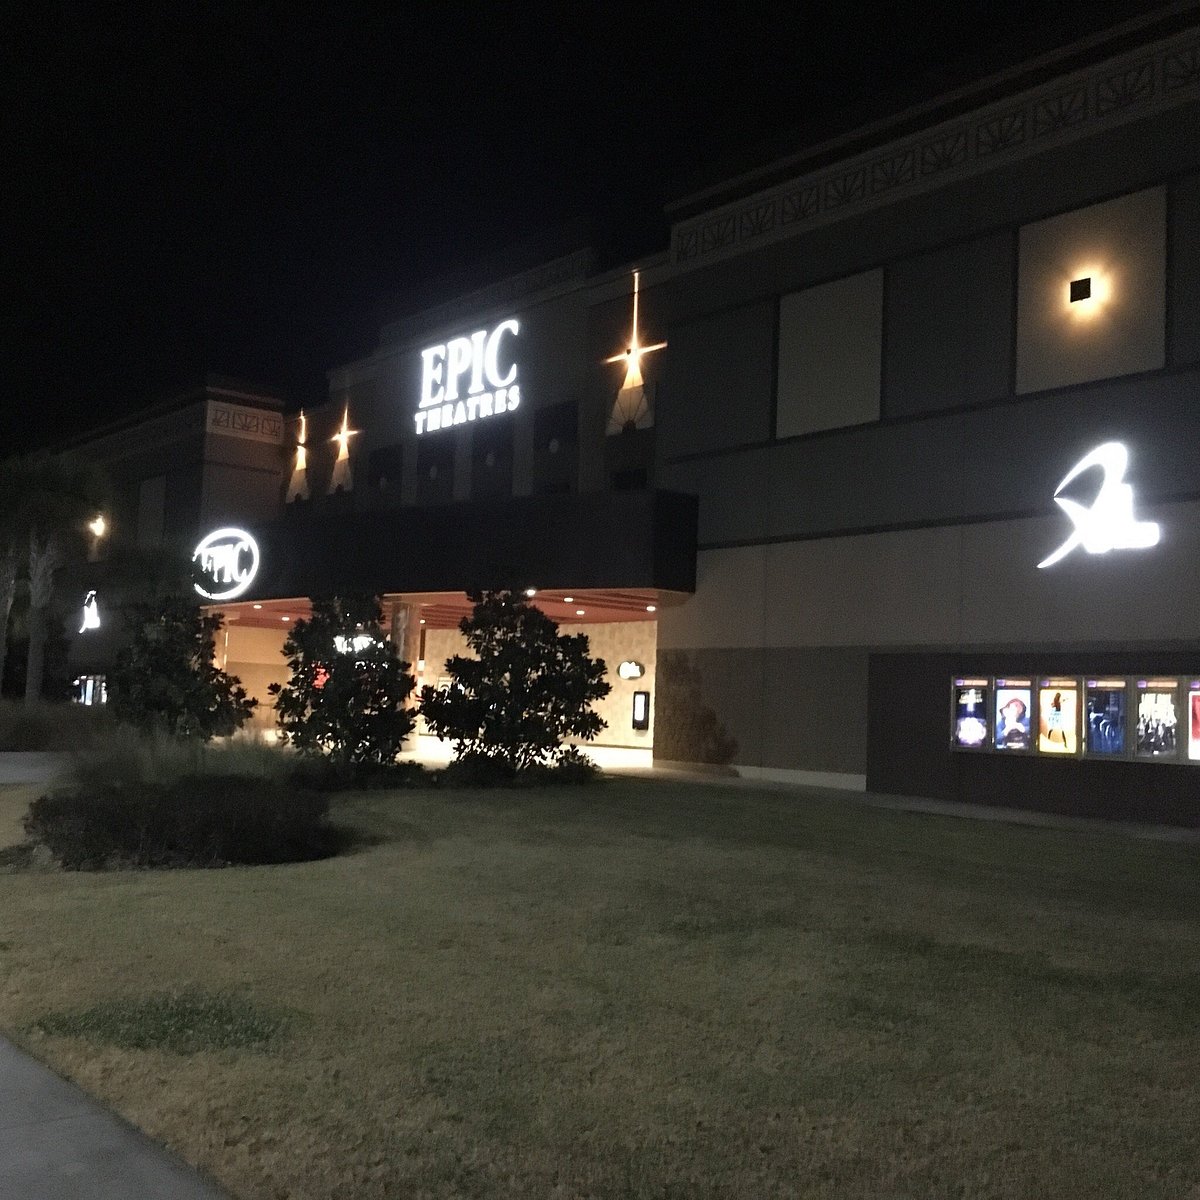 Epic Theatres Deltona - 2021 All You Need To Know Before You Go With Photos - Tripadvisor